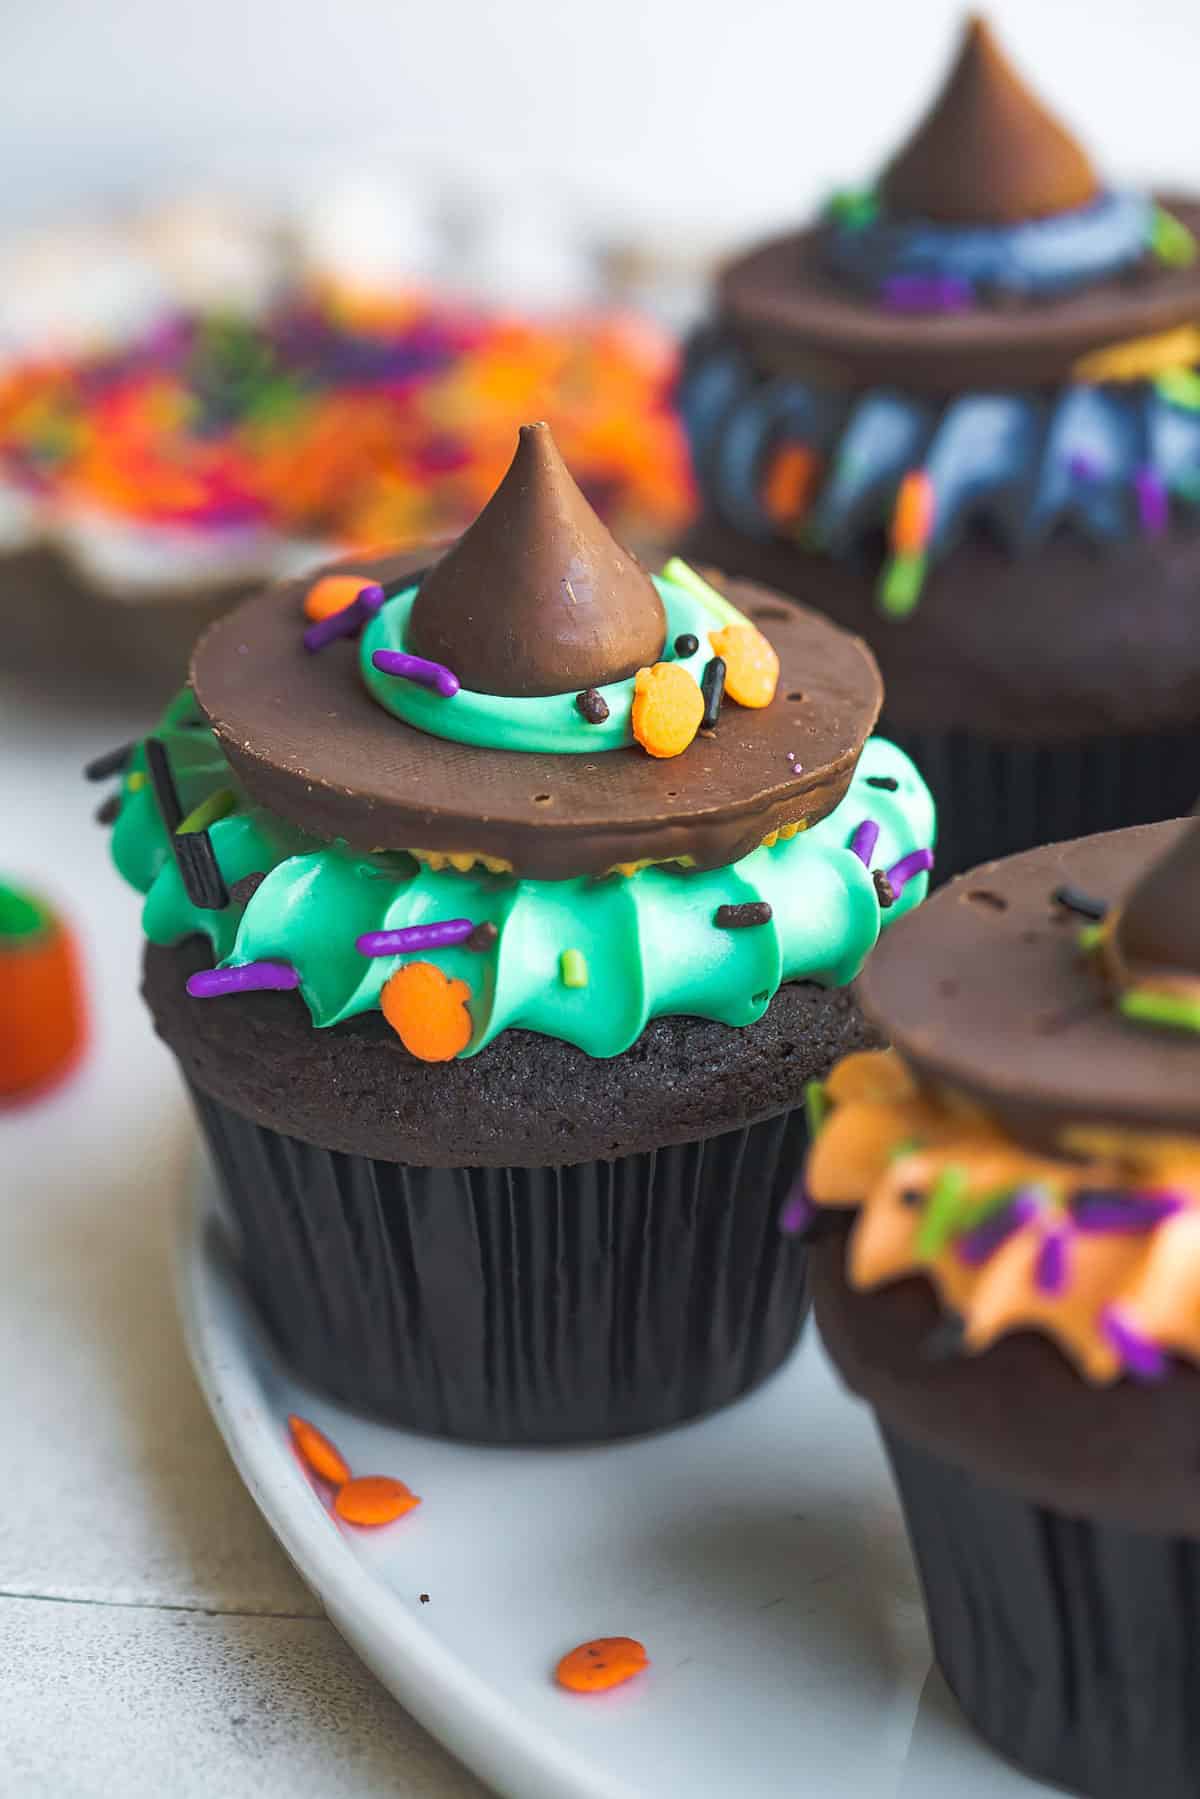 Close-up of a cupcake with green frosting like a witch's hat.